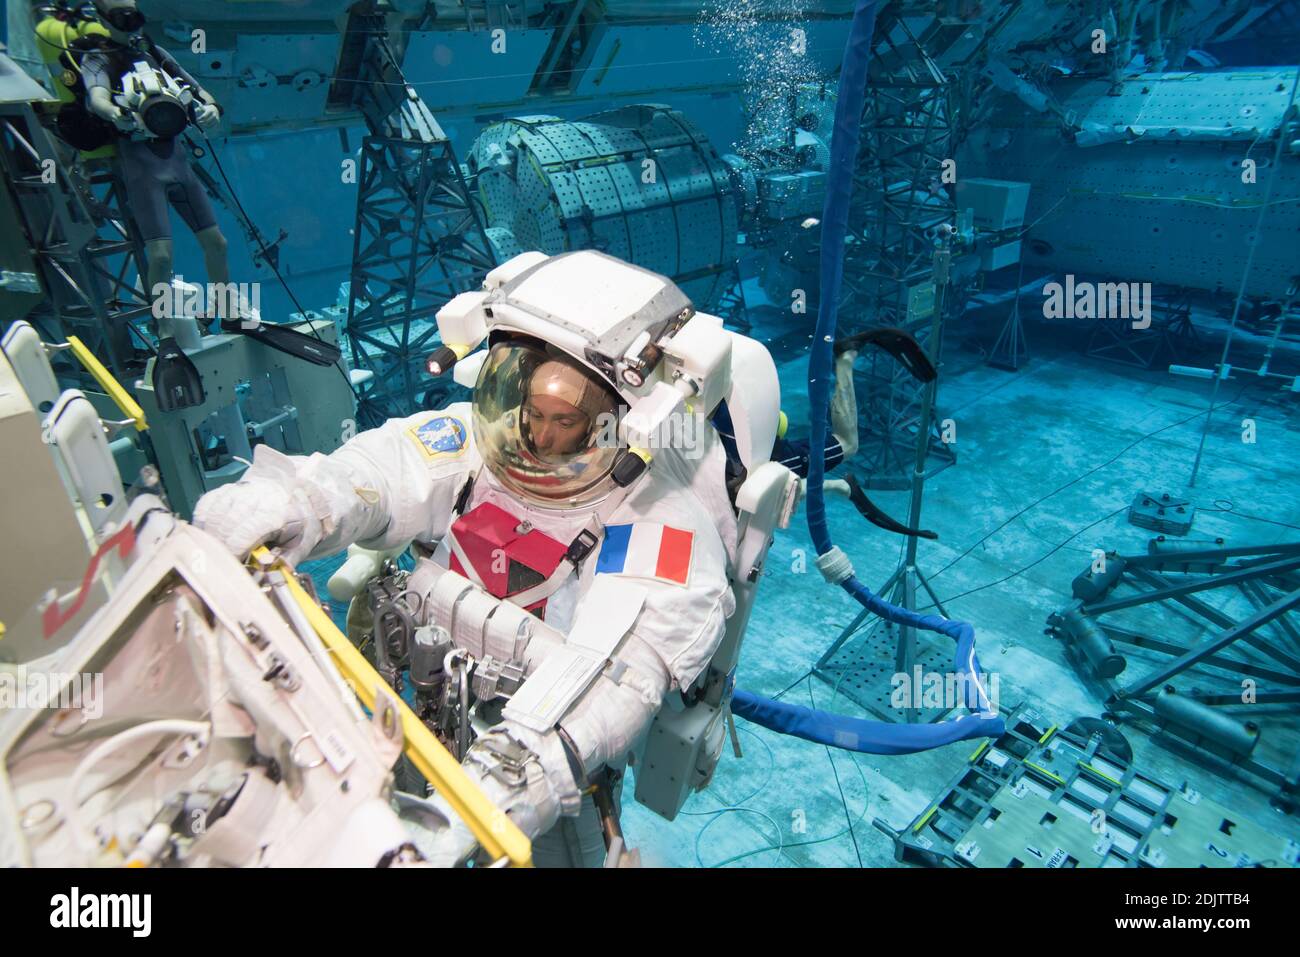 Expedition 50/51 crew member Thomas Pesquet of ESA underwater during a suited run for ISS EVA Maintenance 7 (Battery) training at Sonny Carter Training Facility - Neutral Buoyancy Lab12 in Houston, TX, USA on January 2016. Photo by Bill Brassard/NASA via ABACAPRESS.COM Stock Photo